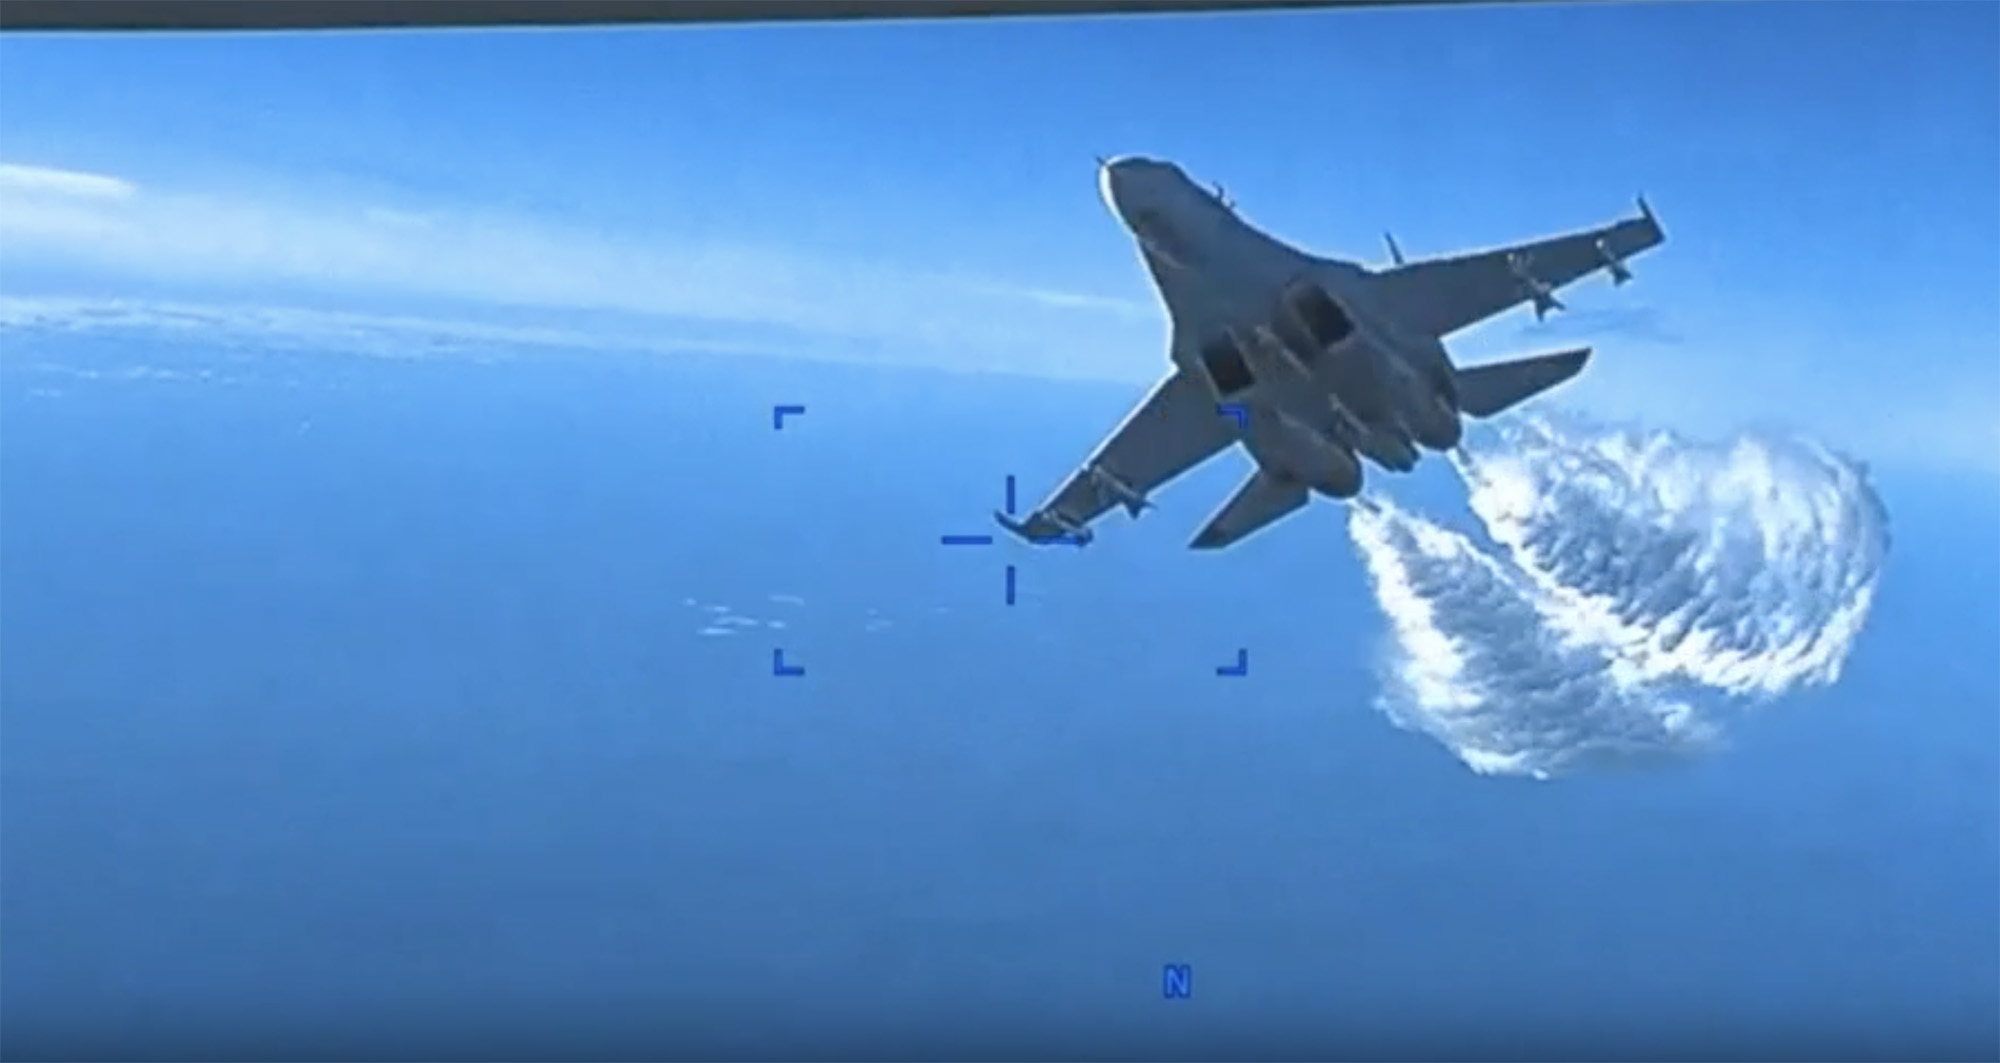 US Air Force MQ-9 camera footage showing a Russian Su-27 flying along side.